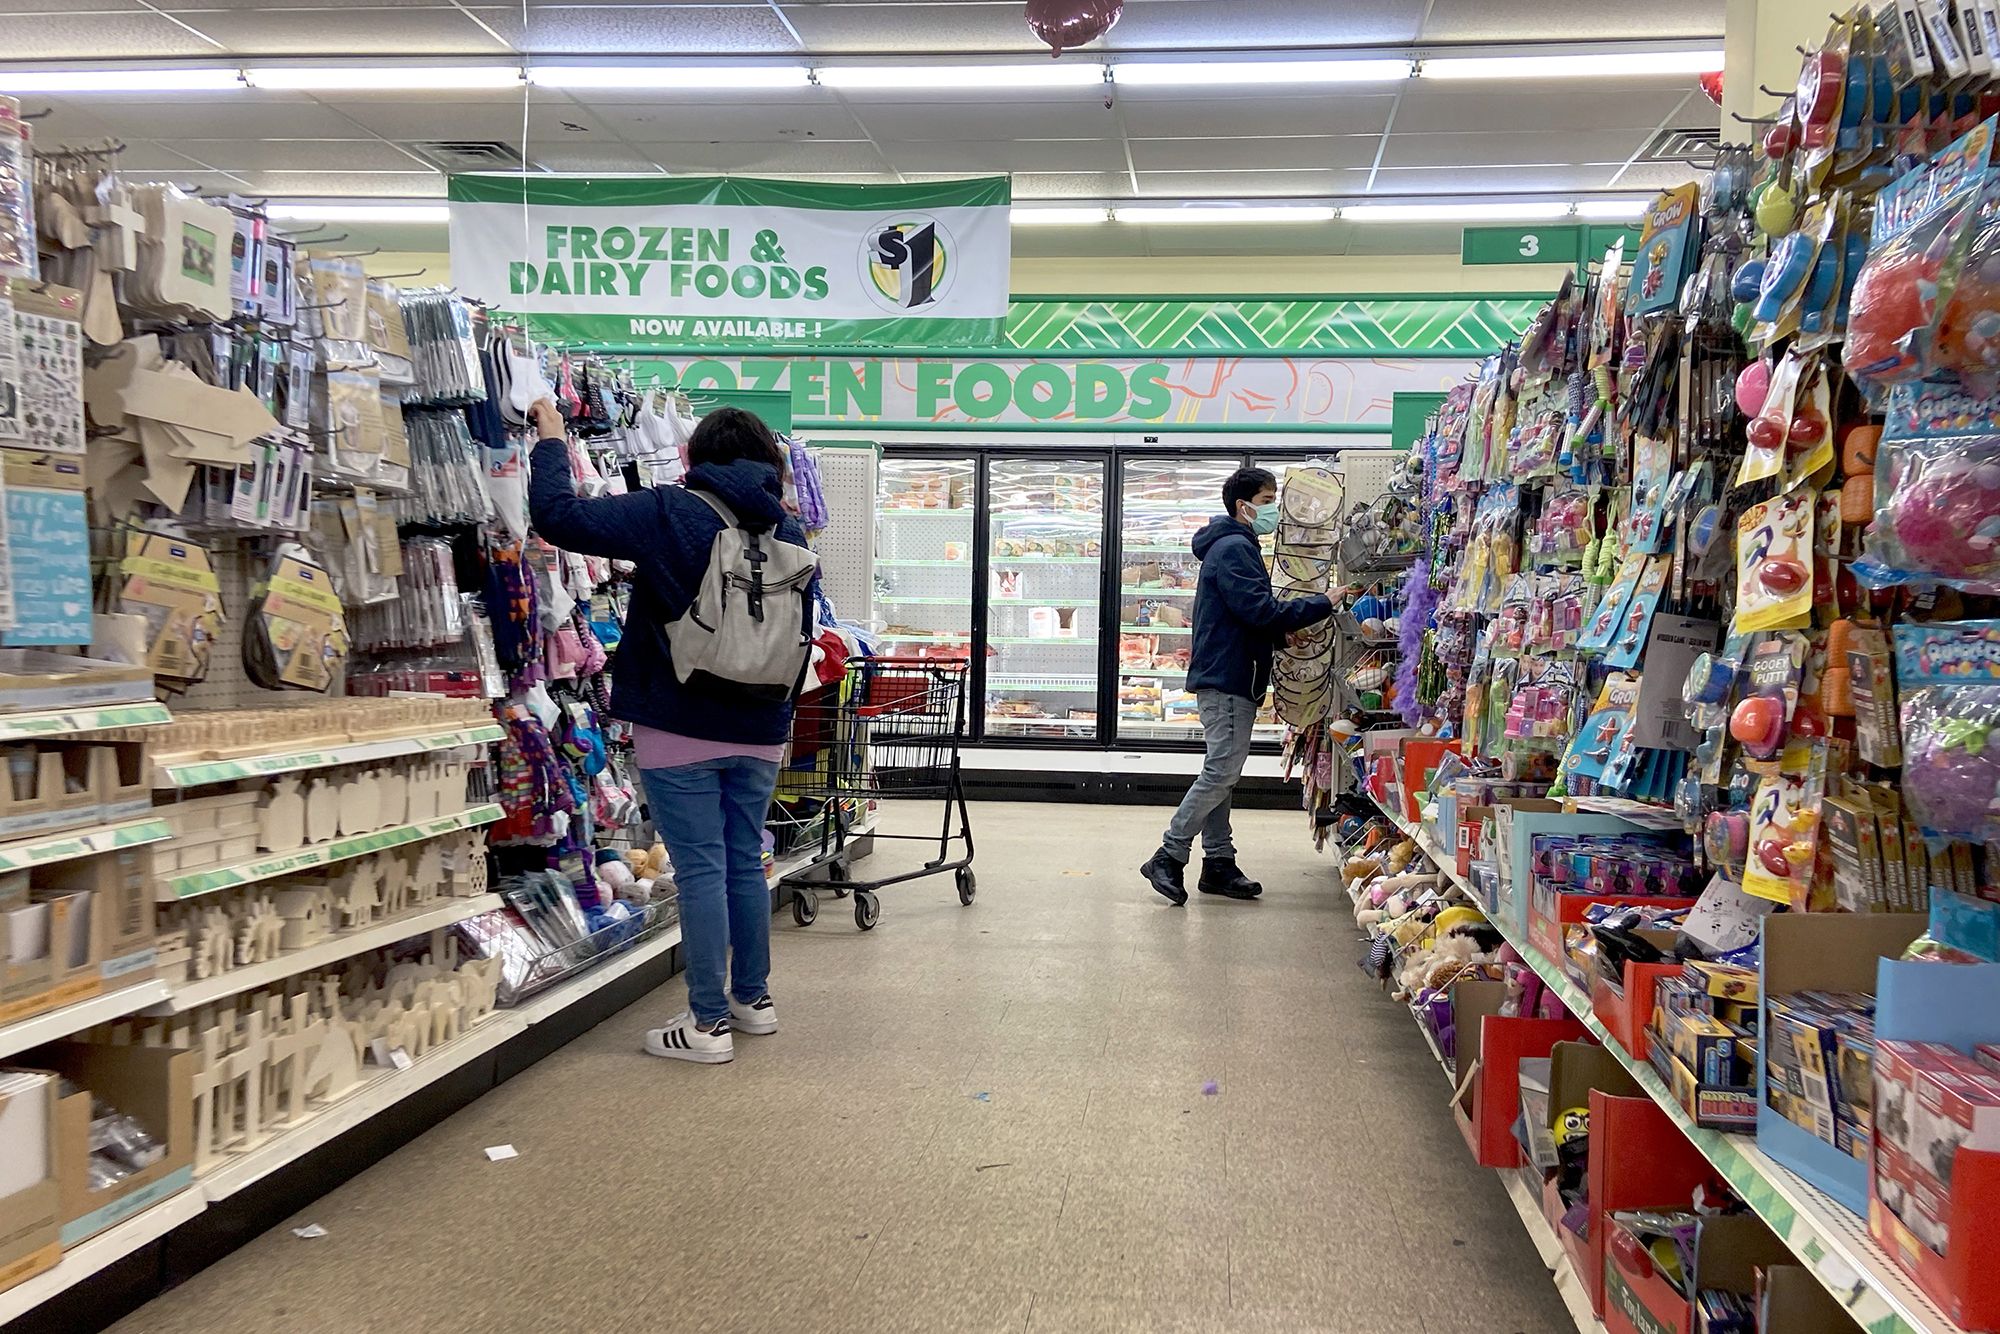 Dollar Tree changing prices back to $1 on hundreds of items 